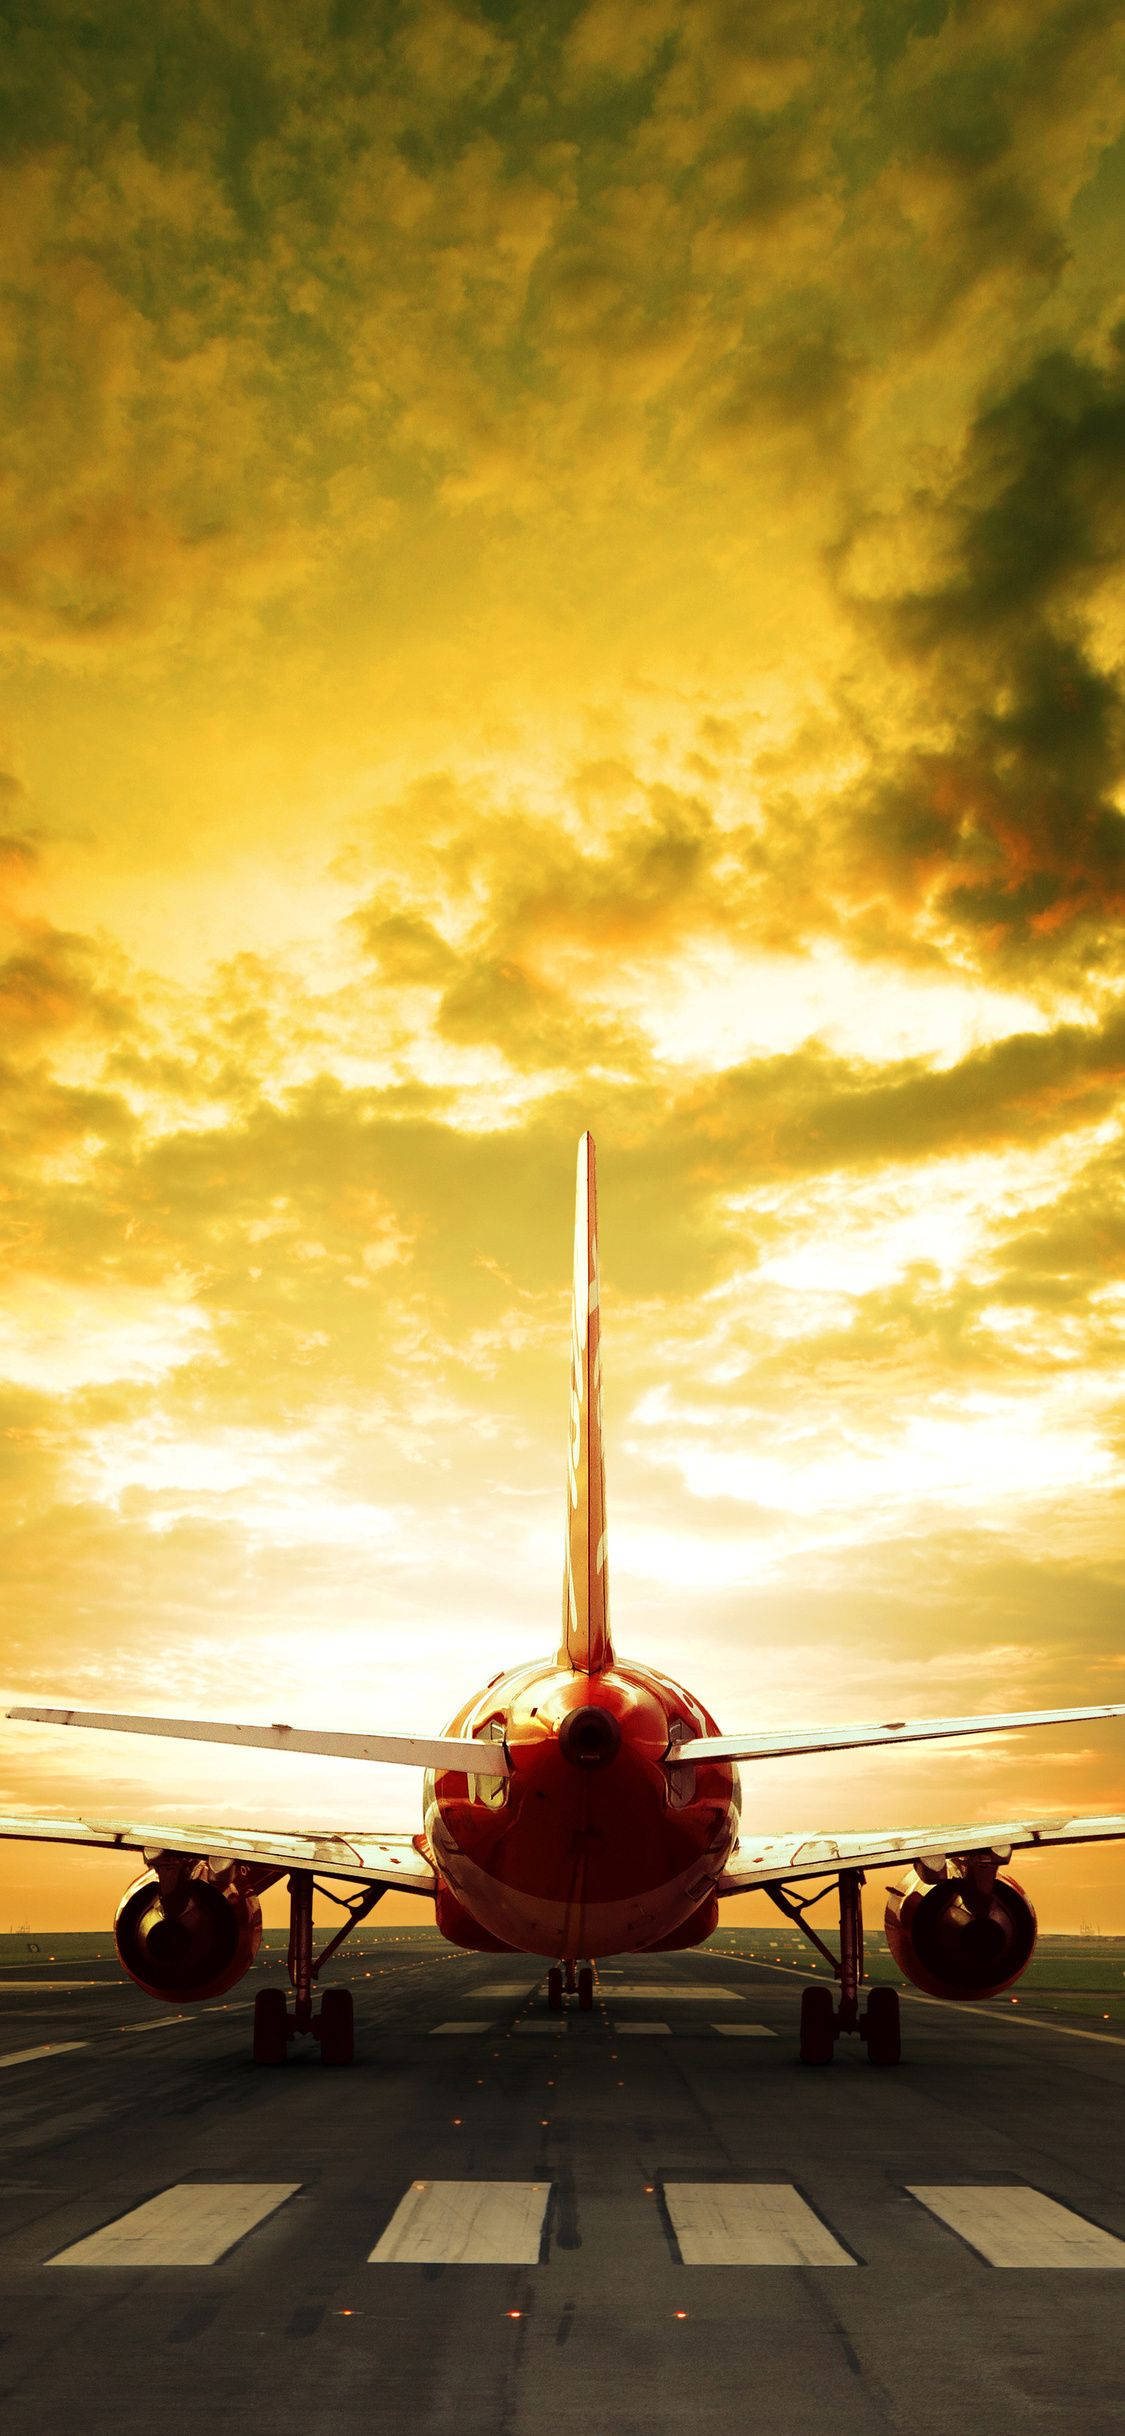 Runway With A Red Airplane Android Wallpaper